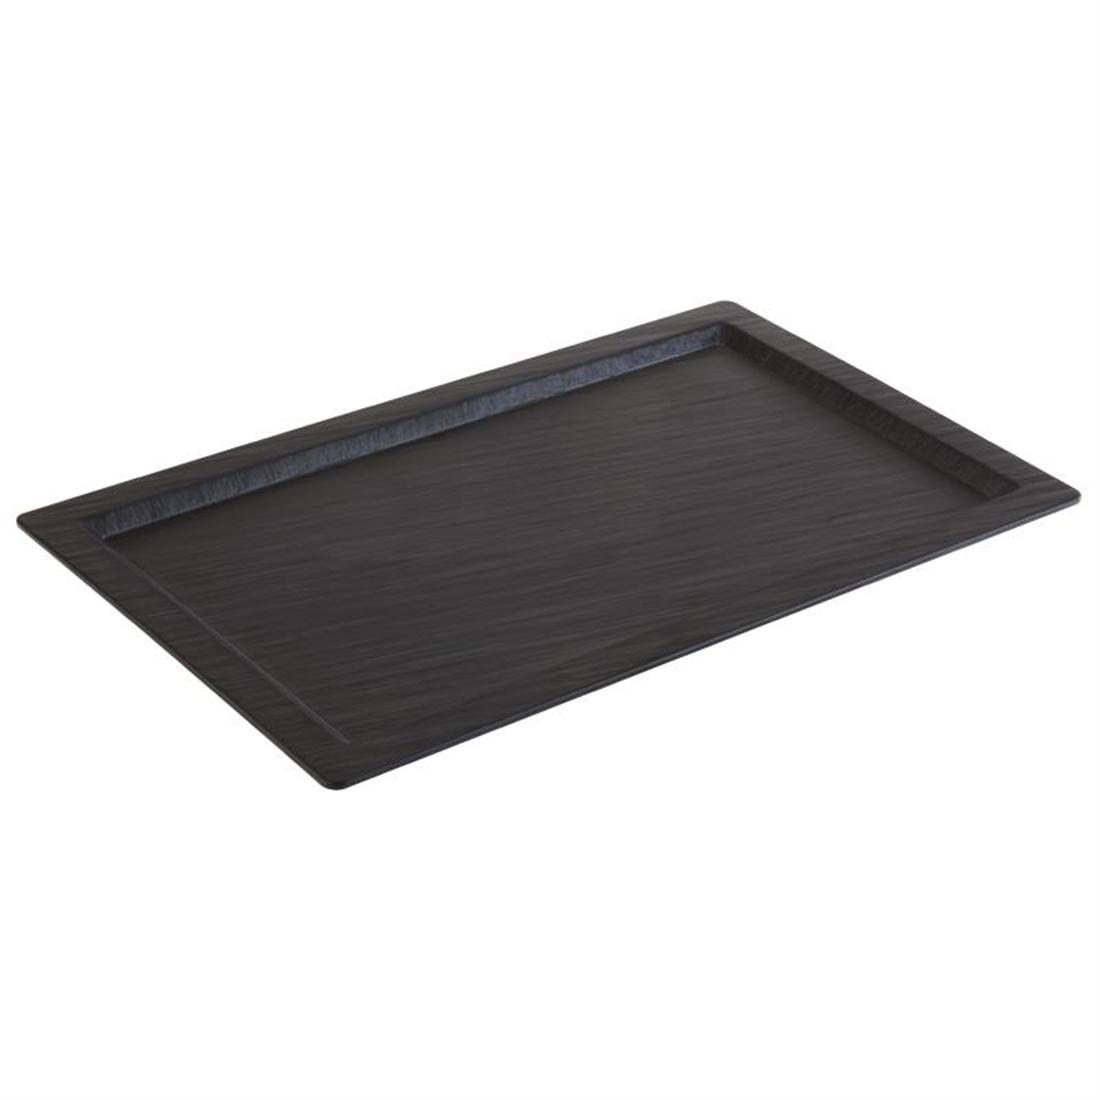 APS Slate Effect Melamine Tray with Rim GN 1/1 - Each - GN563 - 1